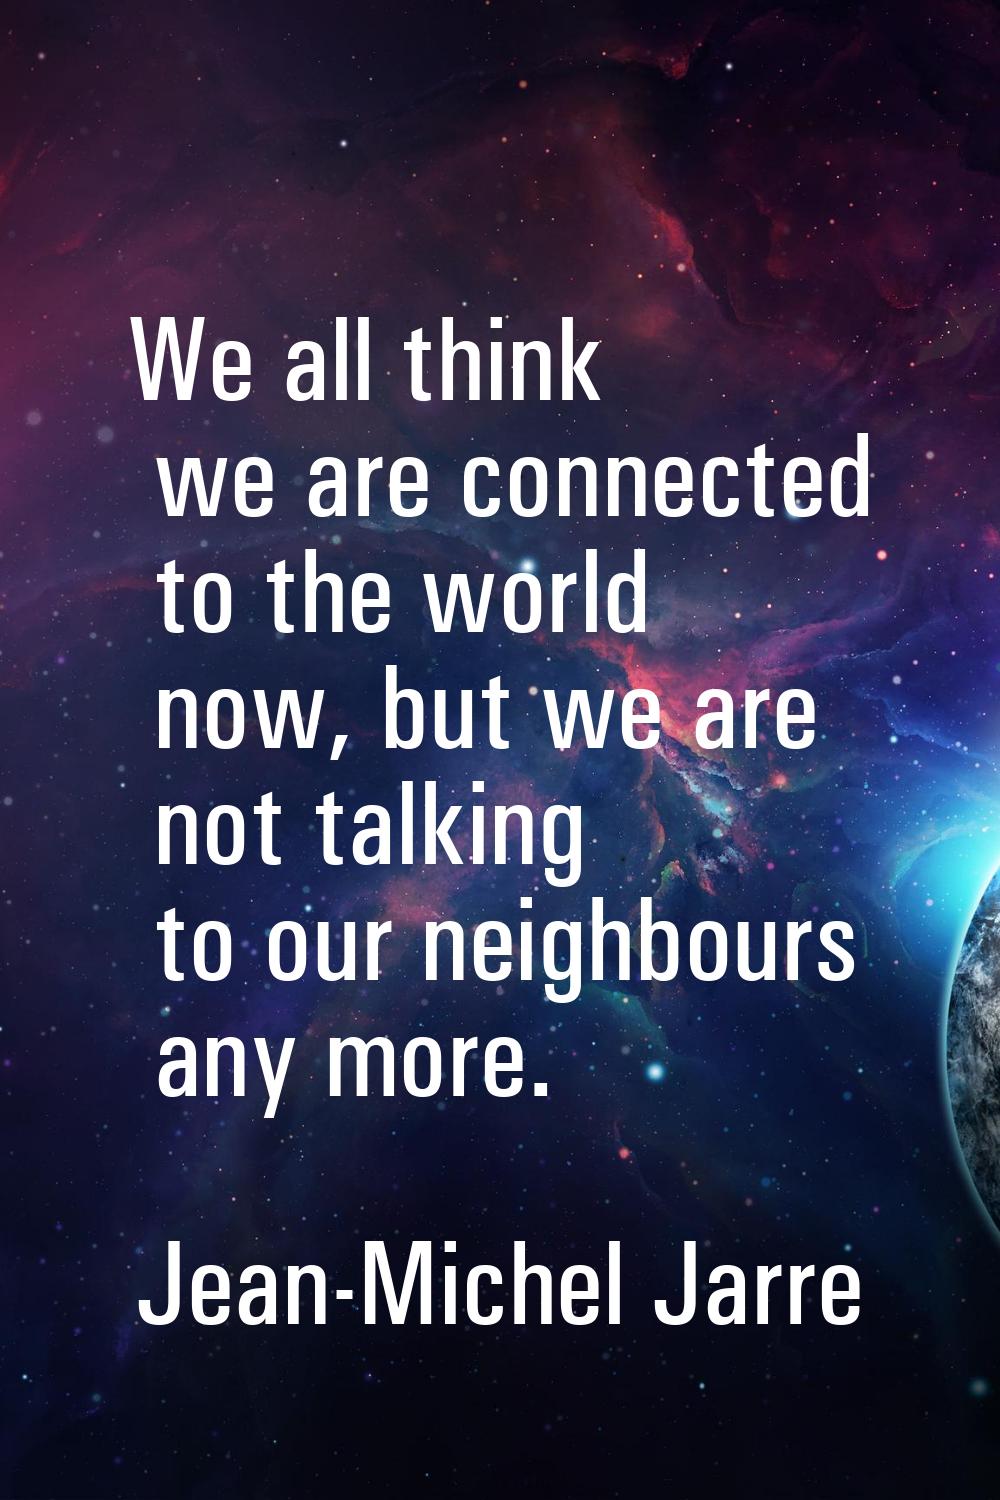 We all think we are connected to the world now, but we are not talking to our neighbours any more.